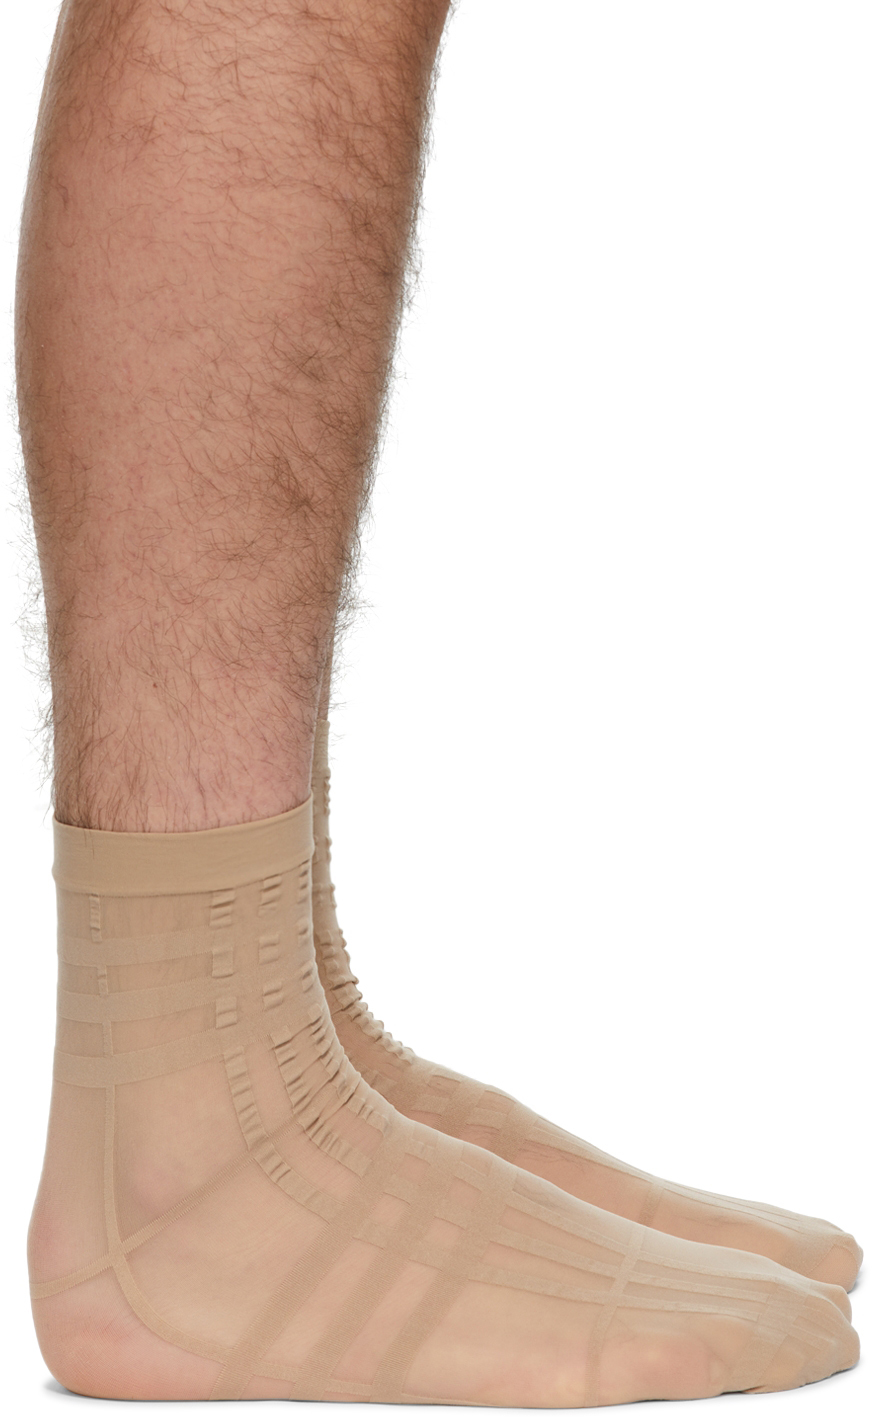 Burberry Beige Intarsia Check Technical Ankle Socks